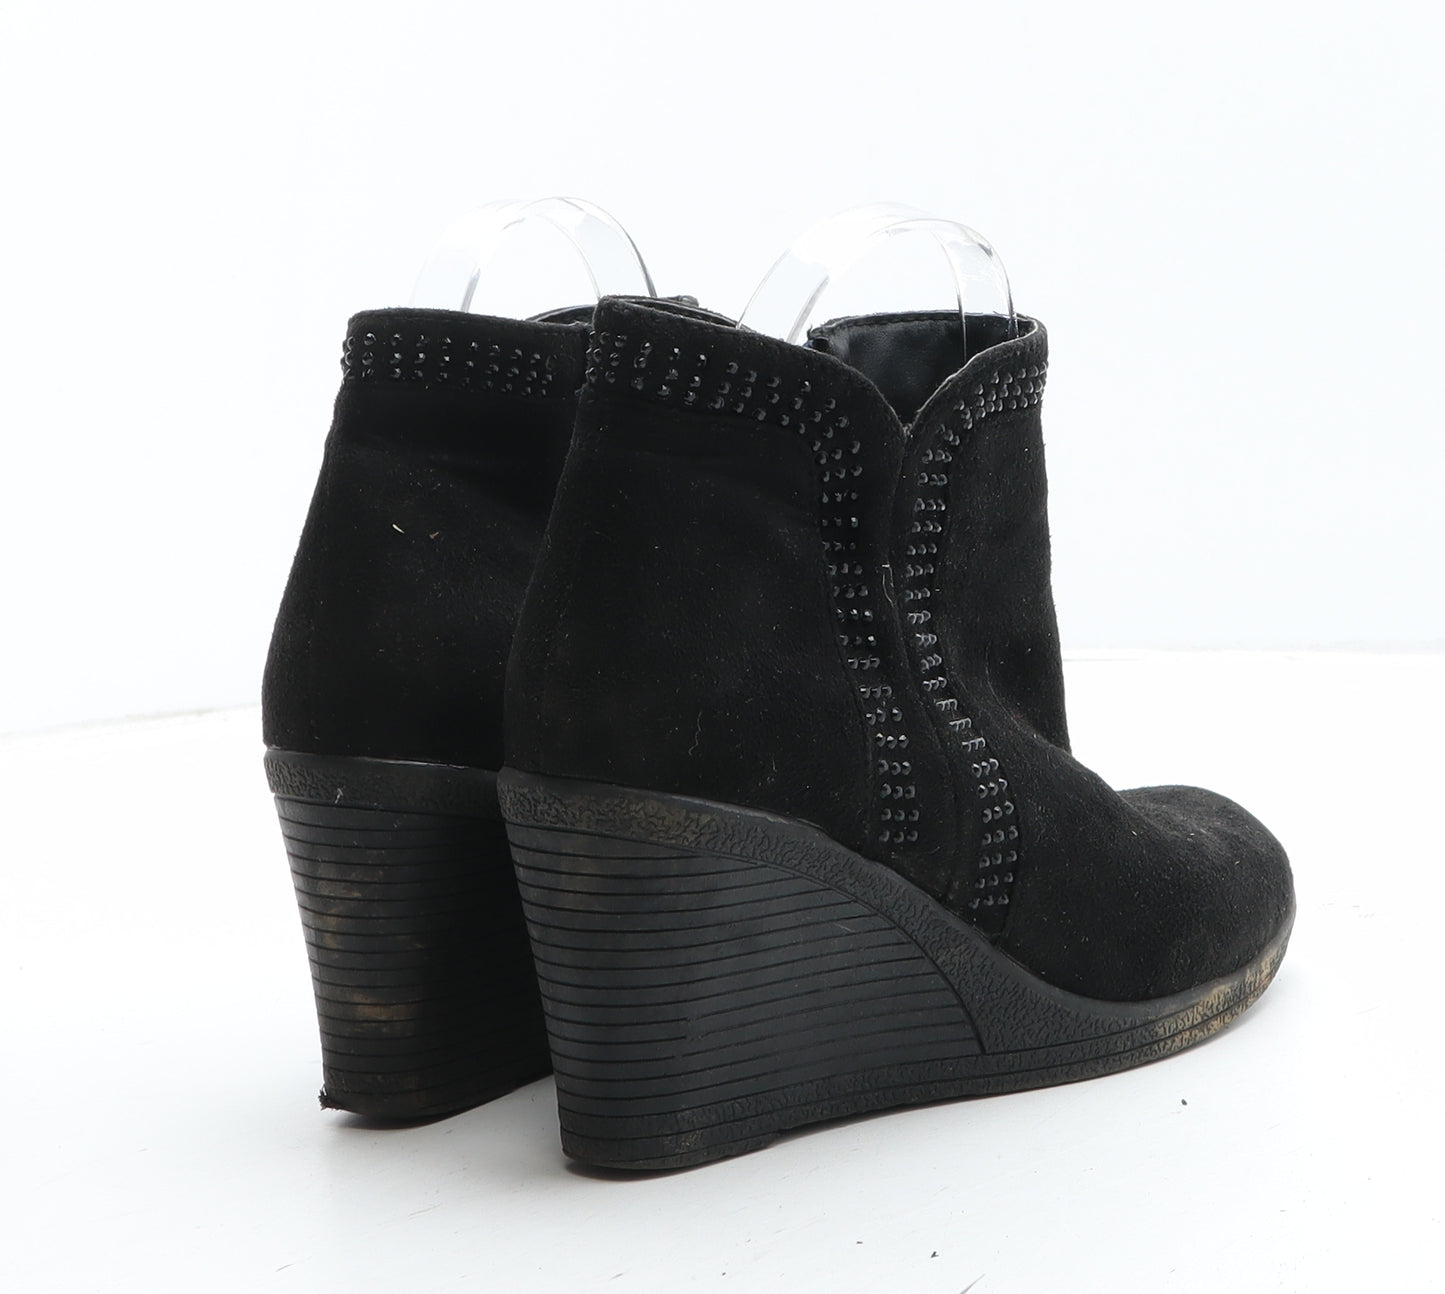 Lilley Womens Black Synthetic Bootie Boot UK